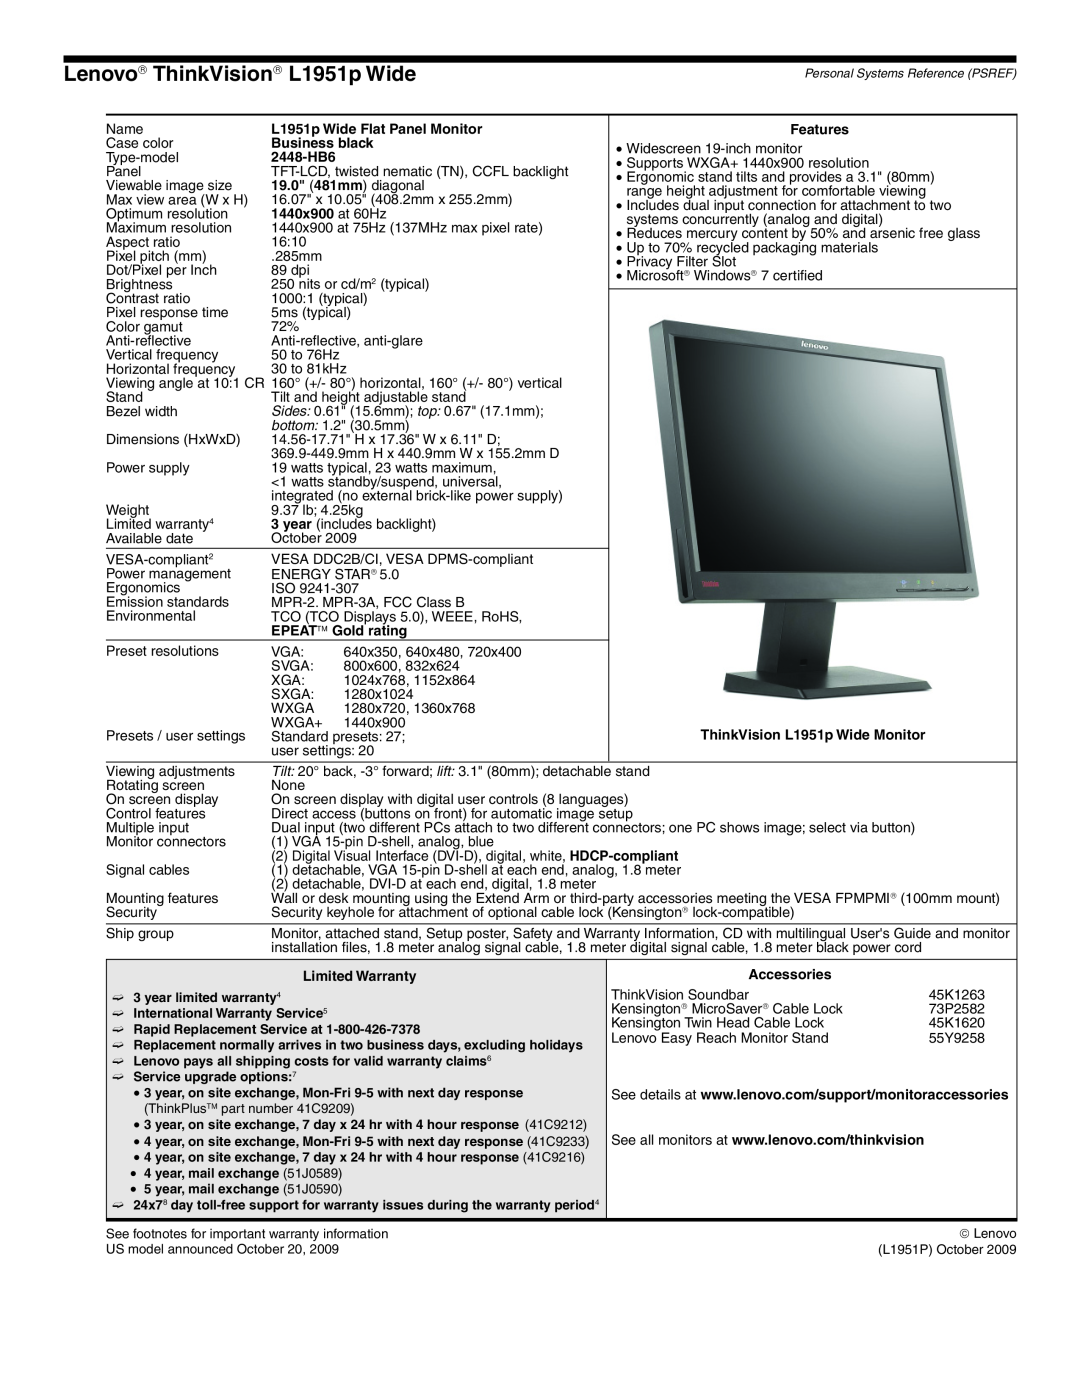 Lenovo L2321x L1951p Wide Flat Panel Monitor, 2448-HB6, 19.0 481mm diagonal, 1440x900 at 60Hz, Features, Business black 